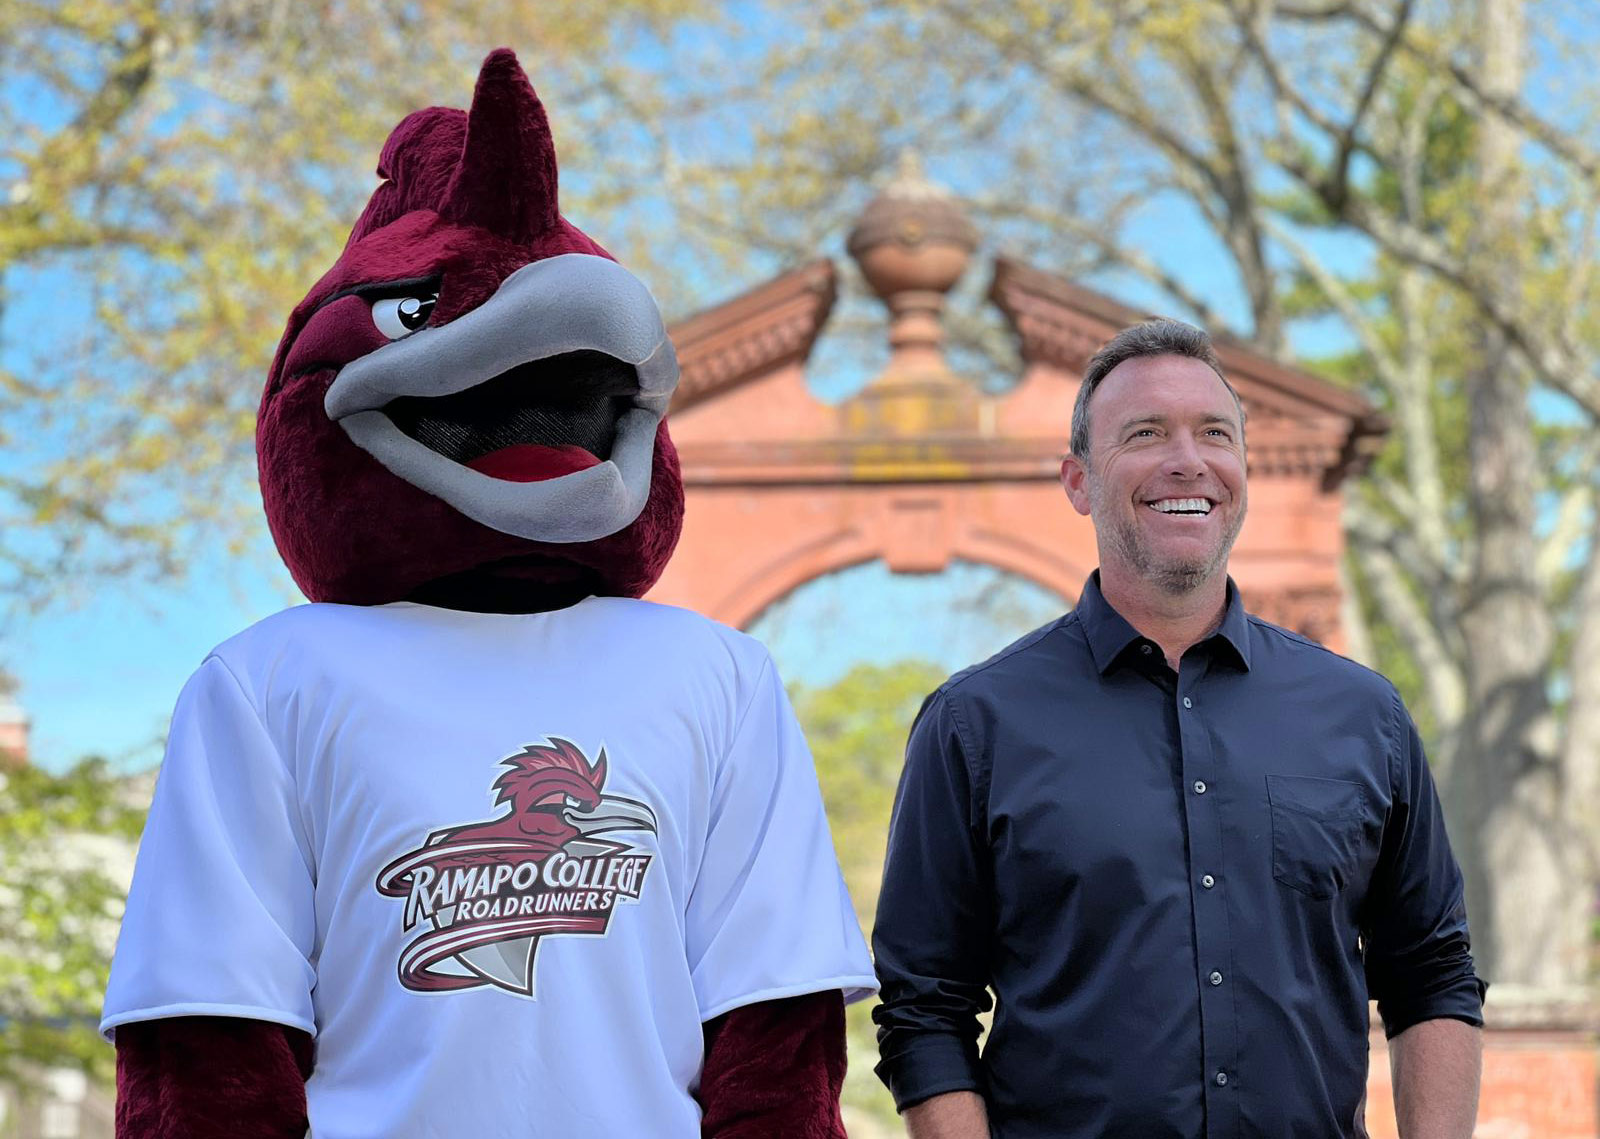 Alex Boylan and Ramapo College's Roadrunner mascot standing together outside of the Havemeyer Arch 